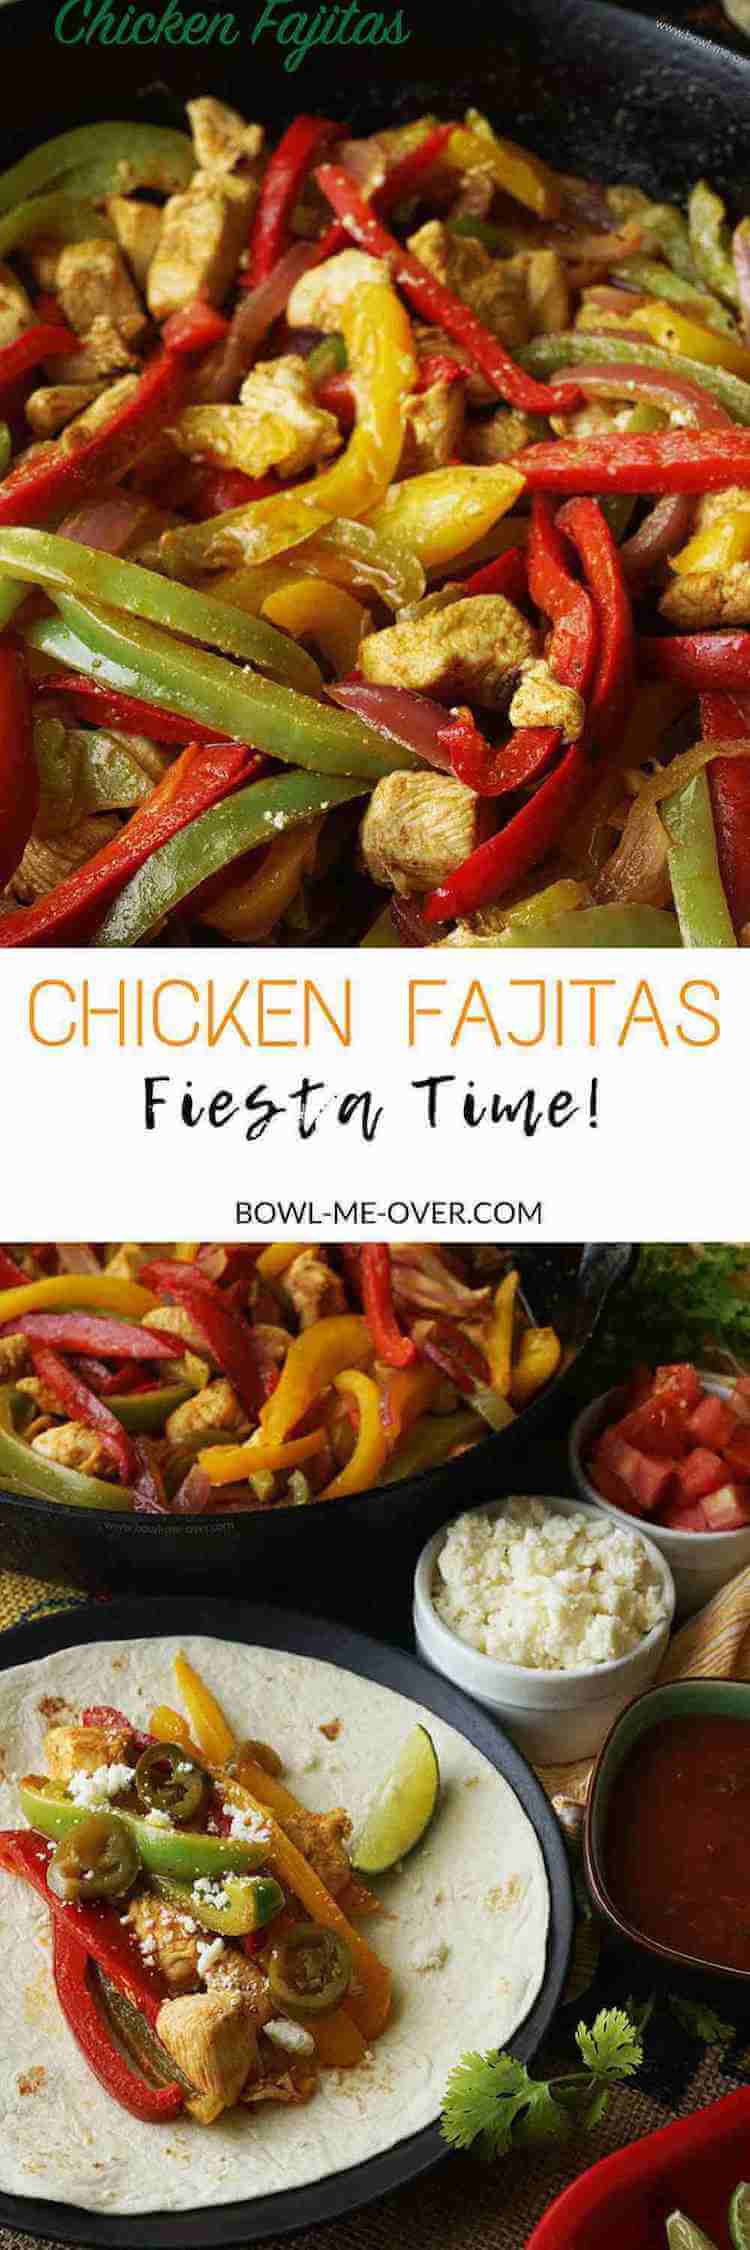 Having a party? Start your fiesta off with a bang by serving Chicken Fajitas! Crowd pleasing meal great for a party or for a fun night at home, flavorful and fabulous!